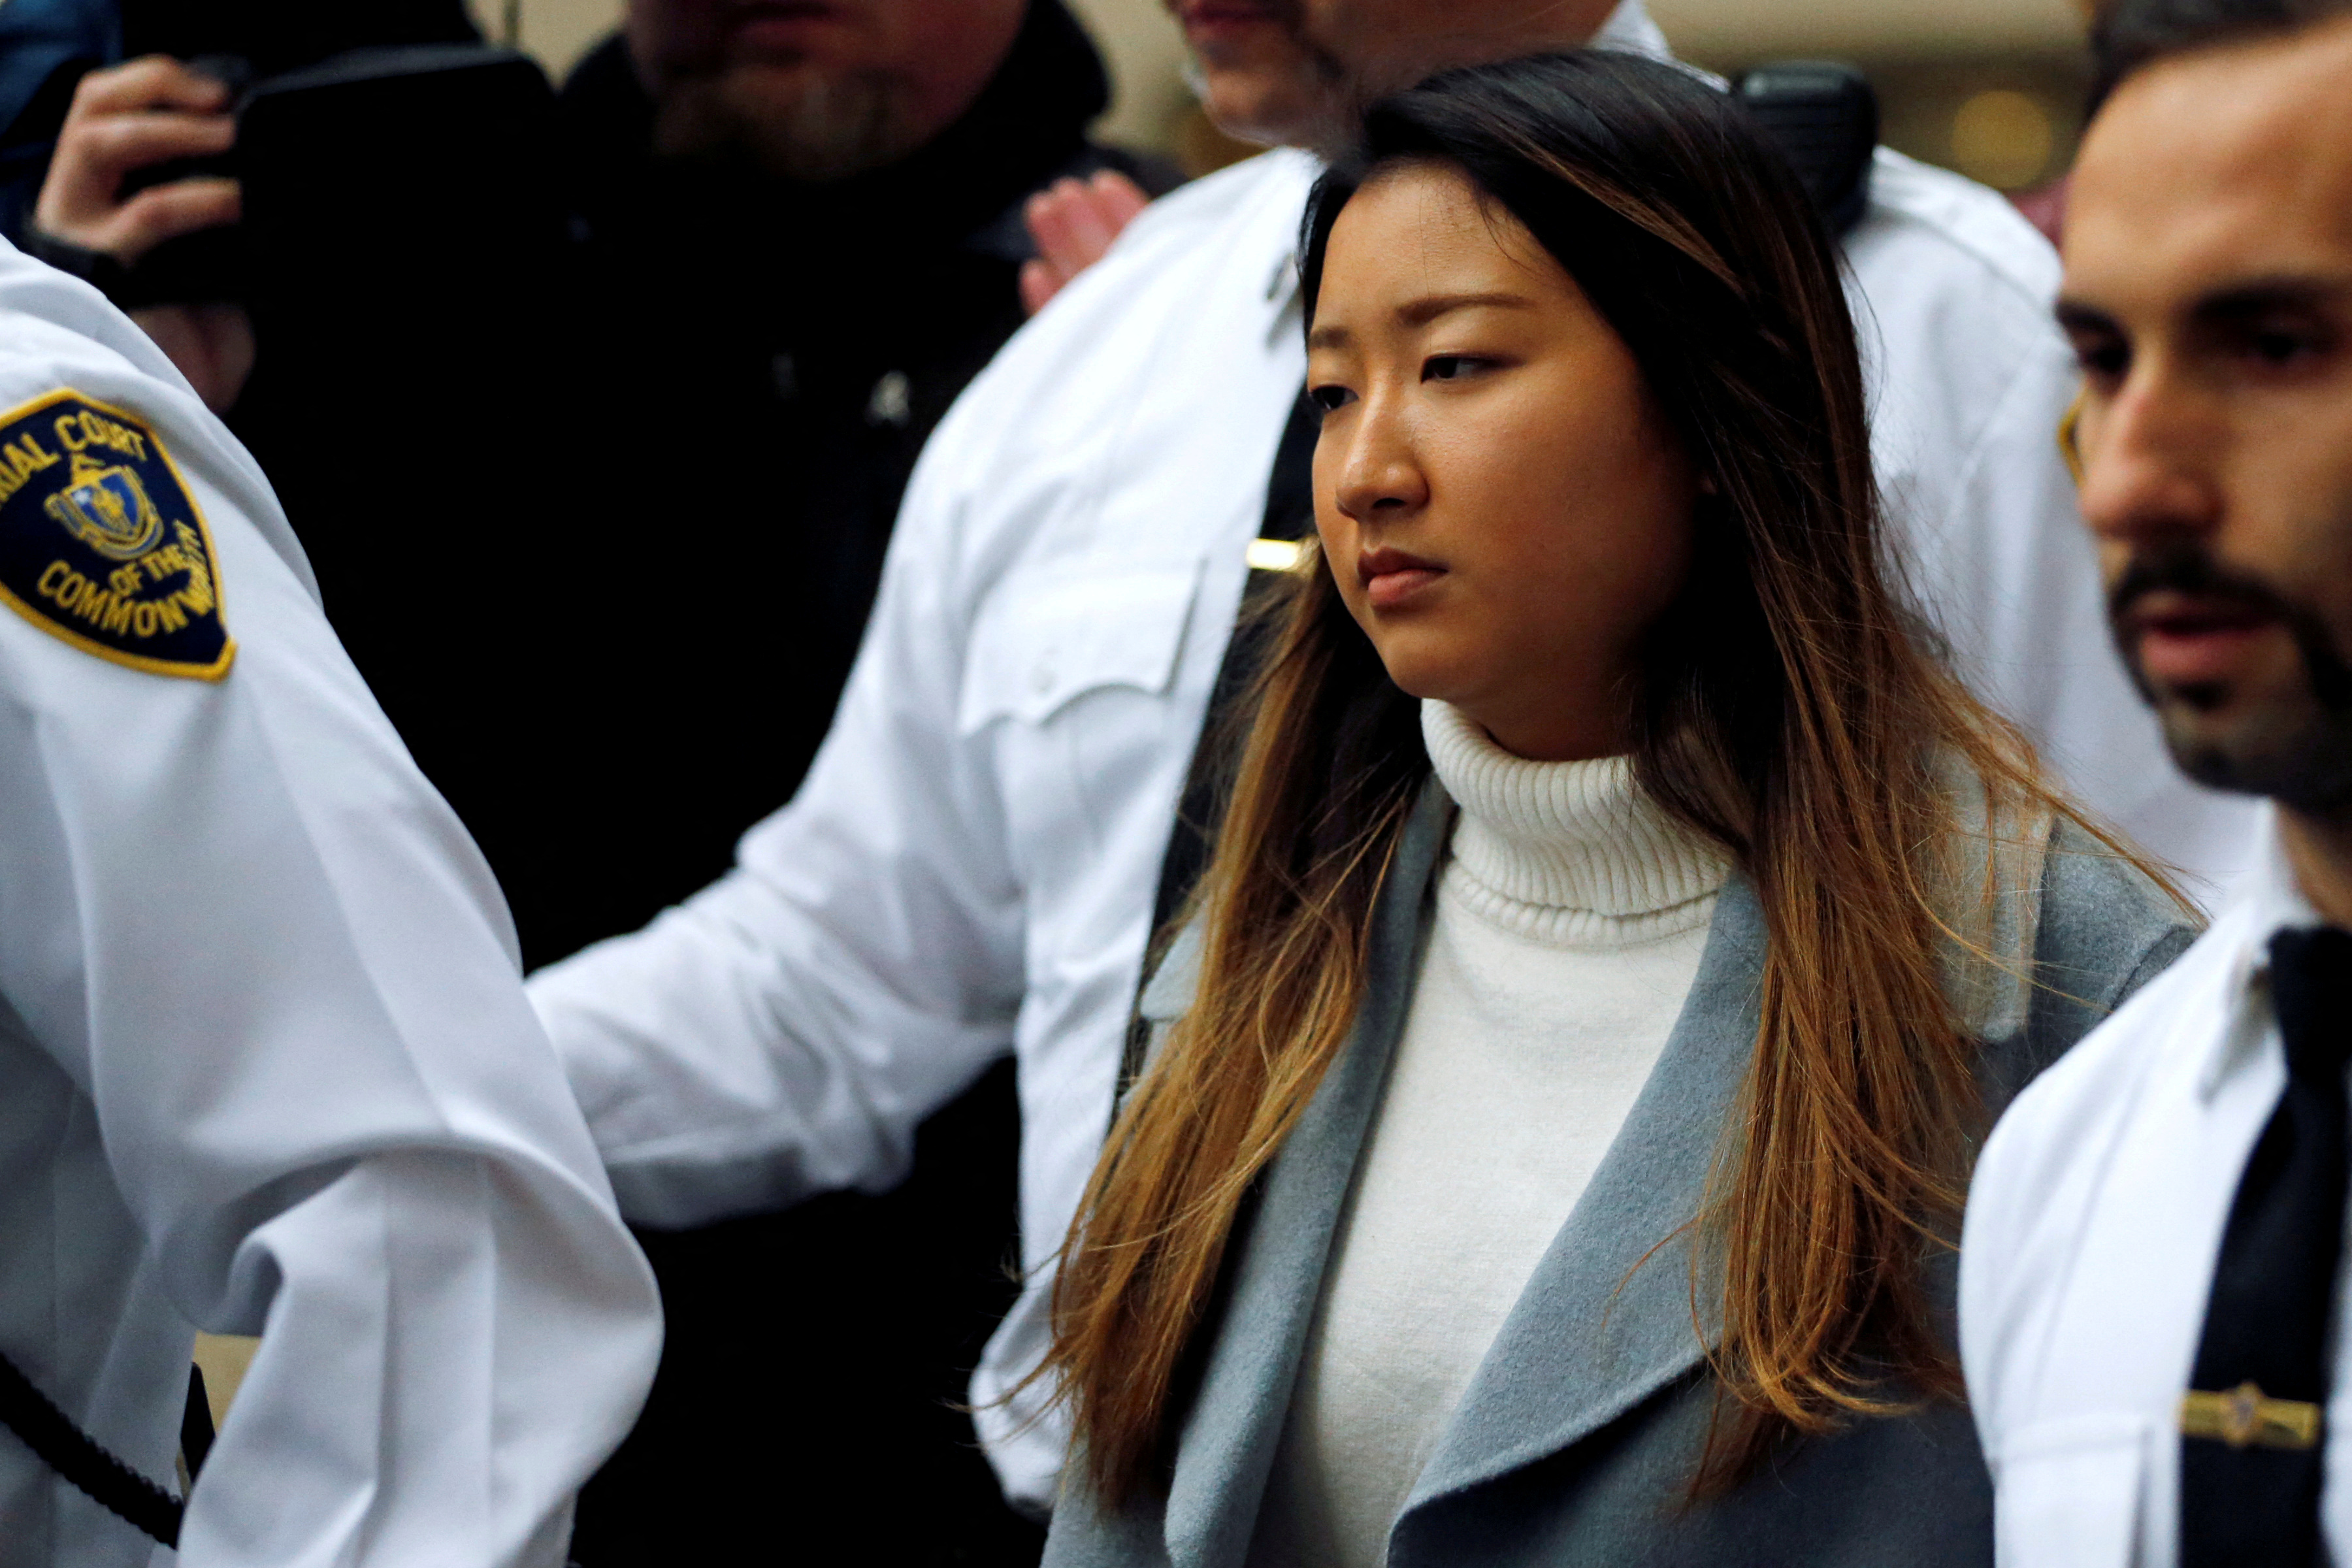 Inyoung You, a former Boston College student from South Korea, leaves after being arraigned